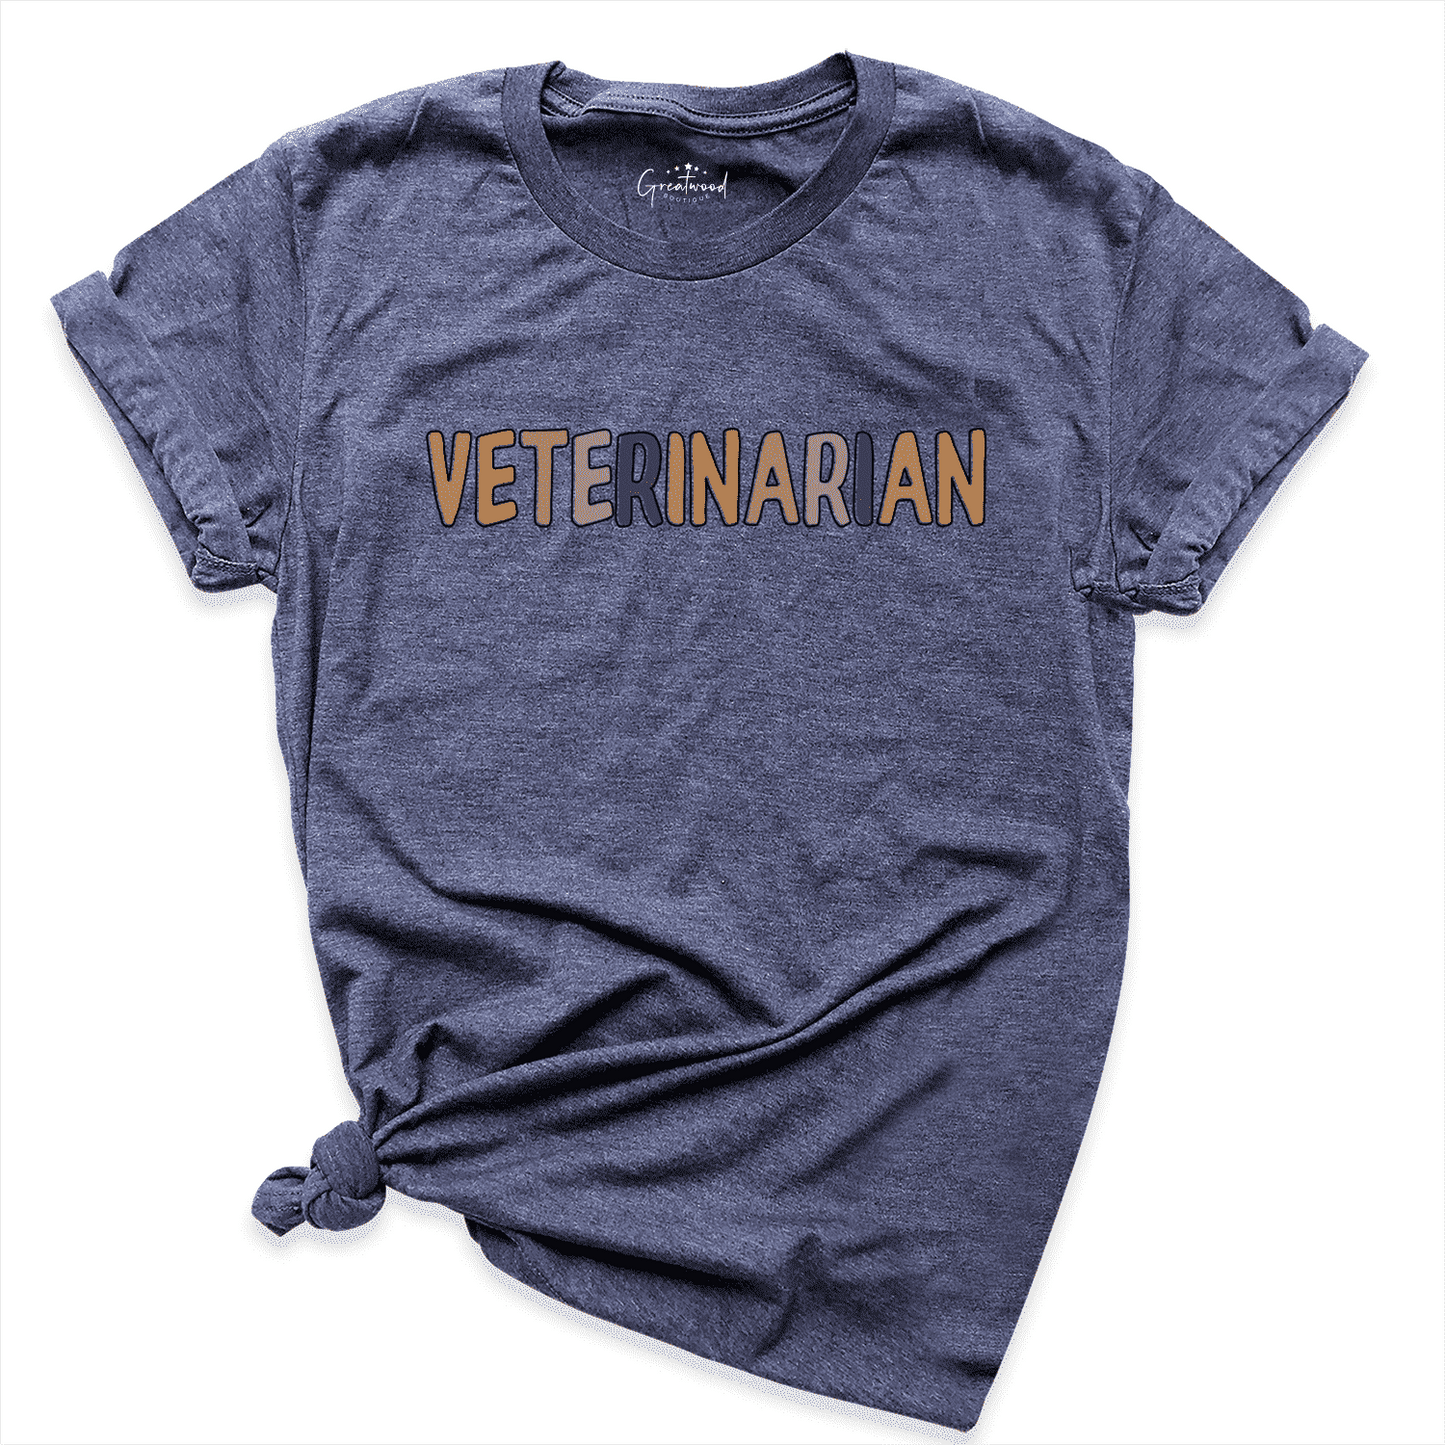 Veterinarian Shirt Navy - Greatwood Boutique